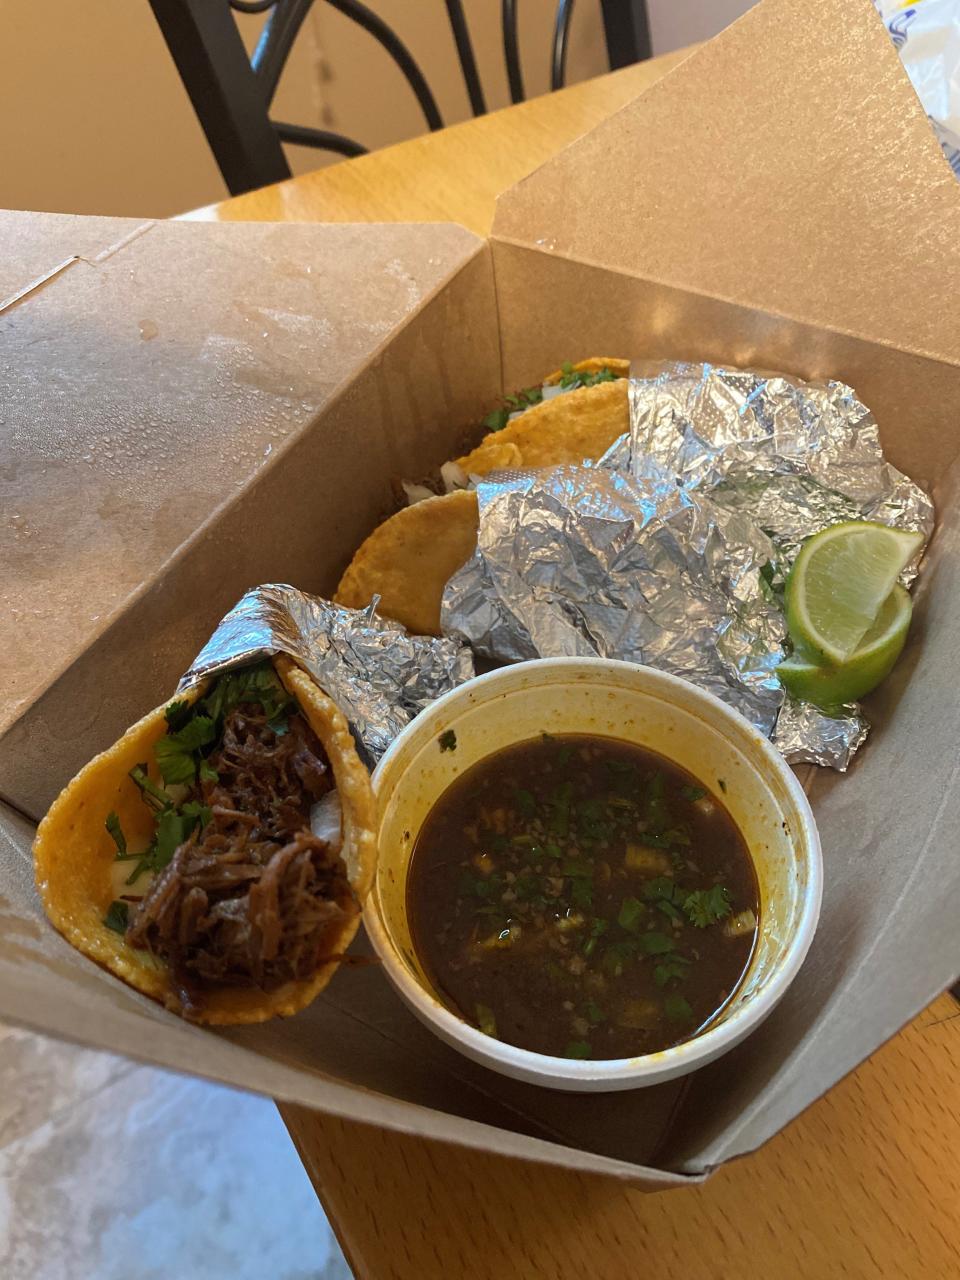 Chofi Taco in Union City is one of the most popular birria spots in New Jersey